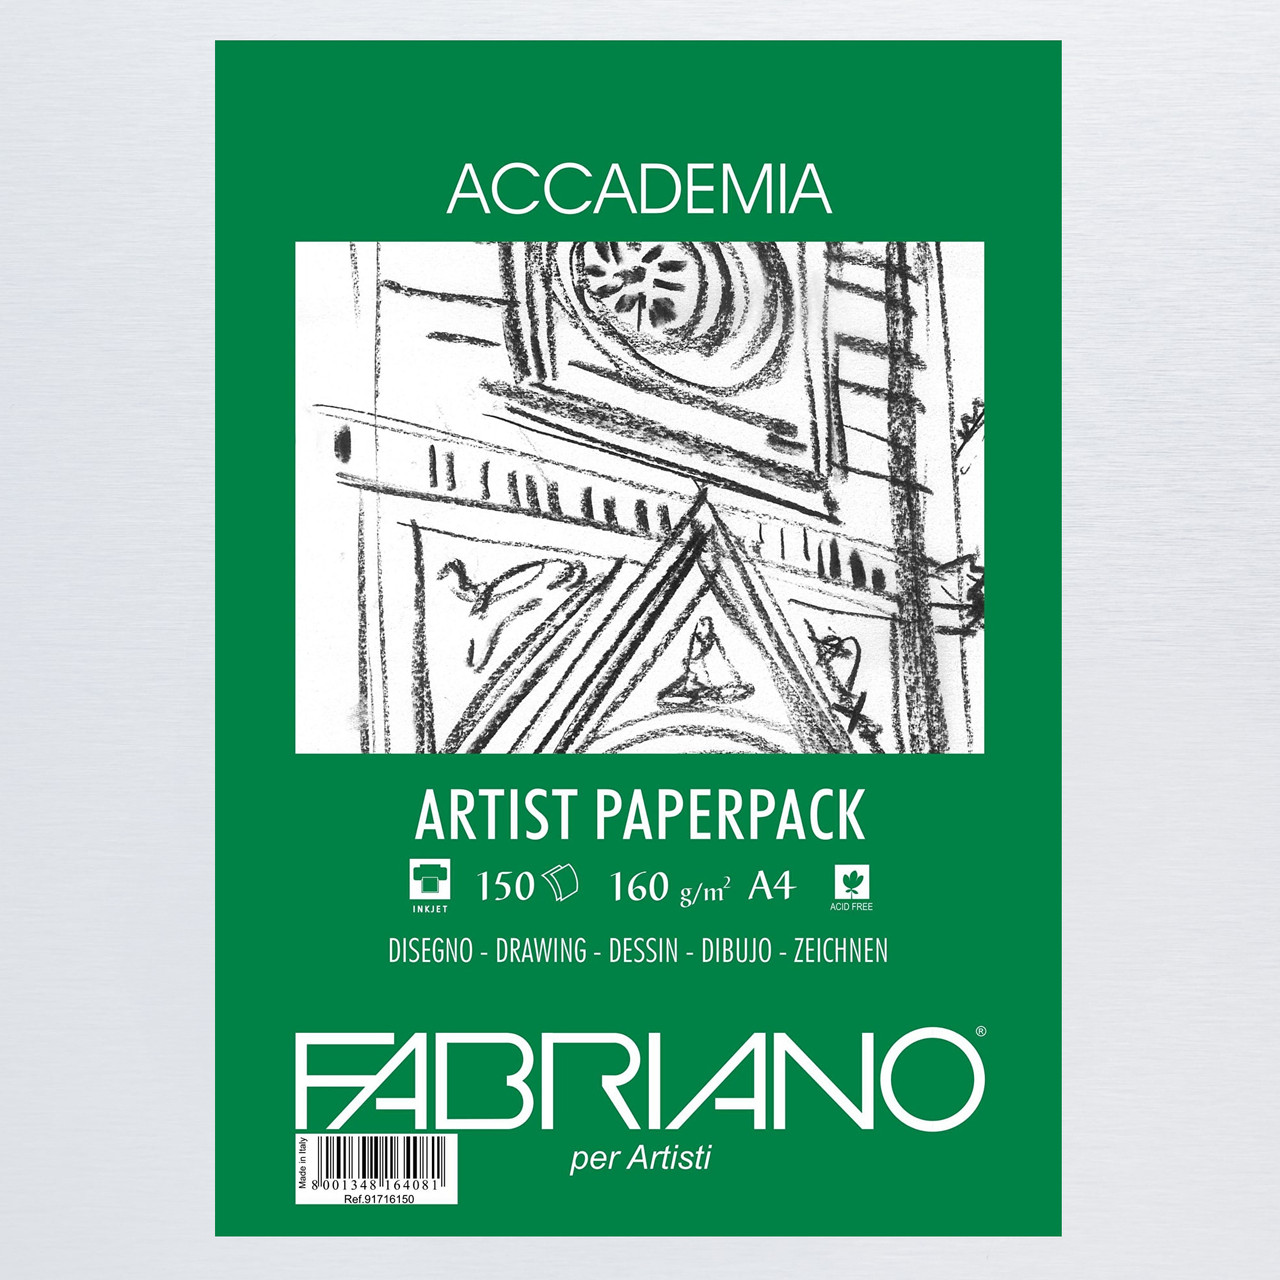 Fabriano Accademia Artist Pack 160gsm 150 sheets A4